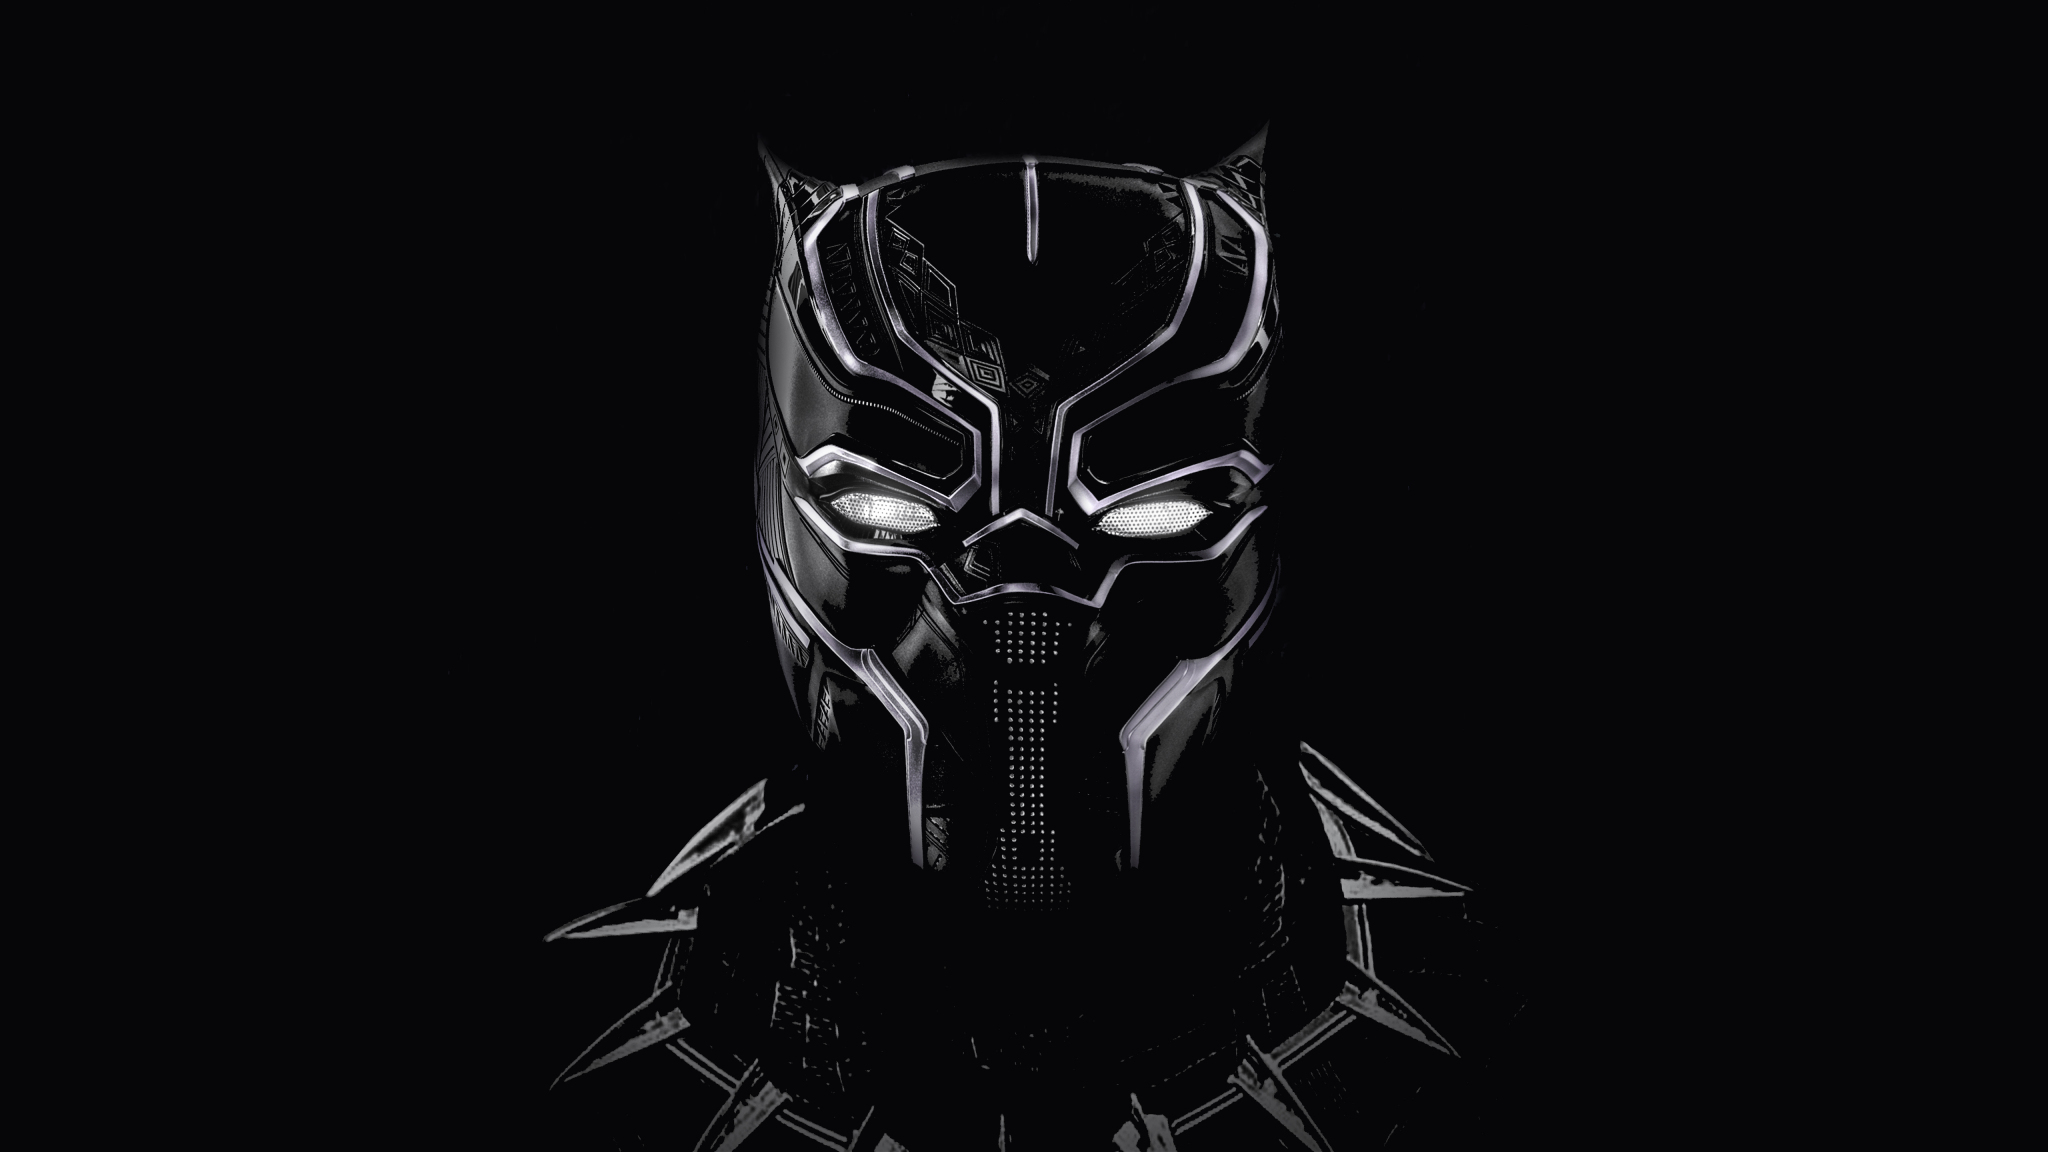 Download 48x1152 Wallpaper Black Panther Black Mask Artwork Dual Wide Widescreen 48x1152 Hd Image Background 3957